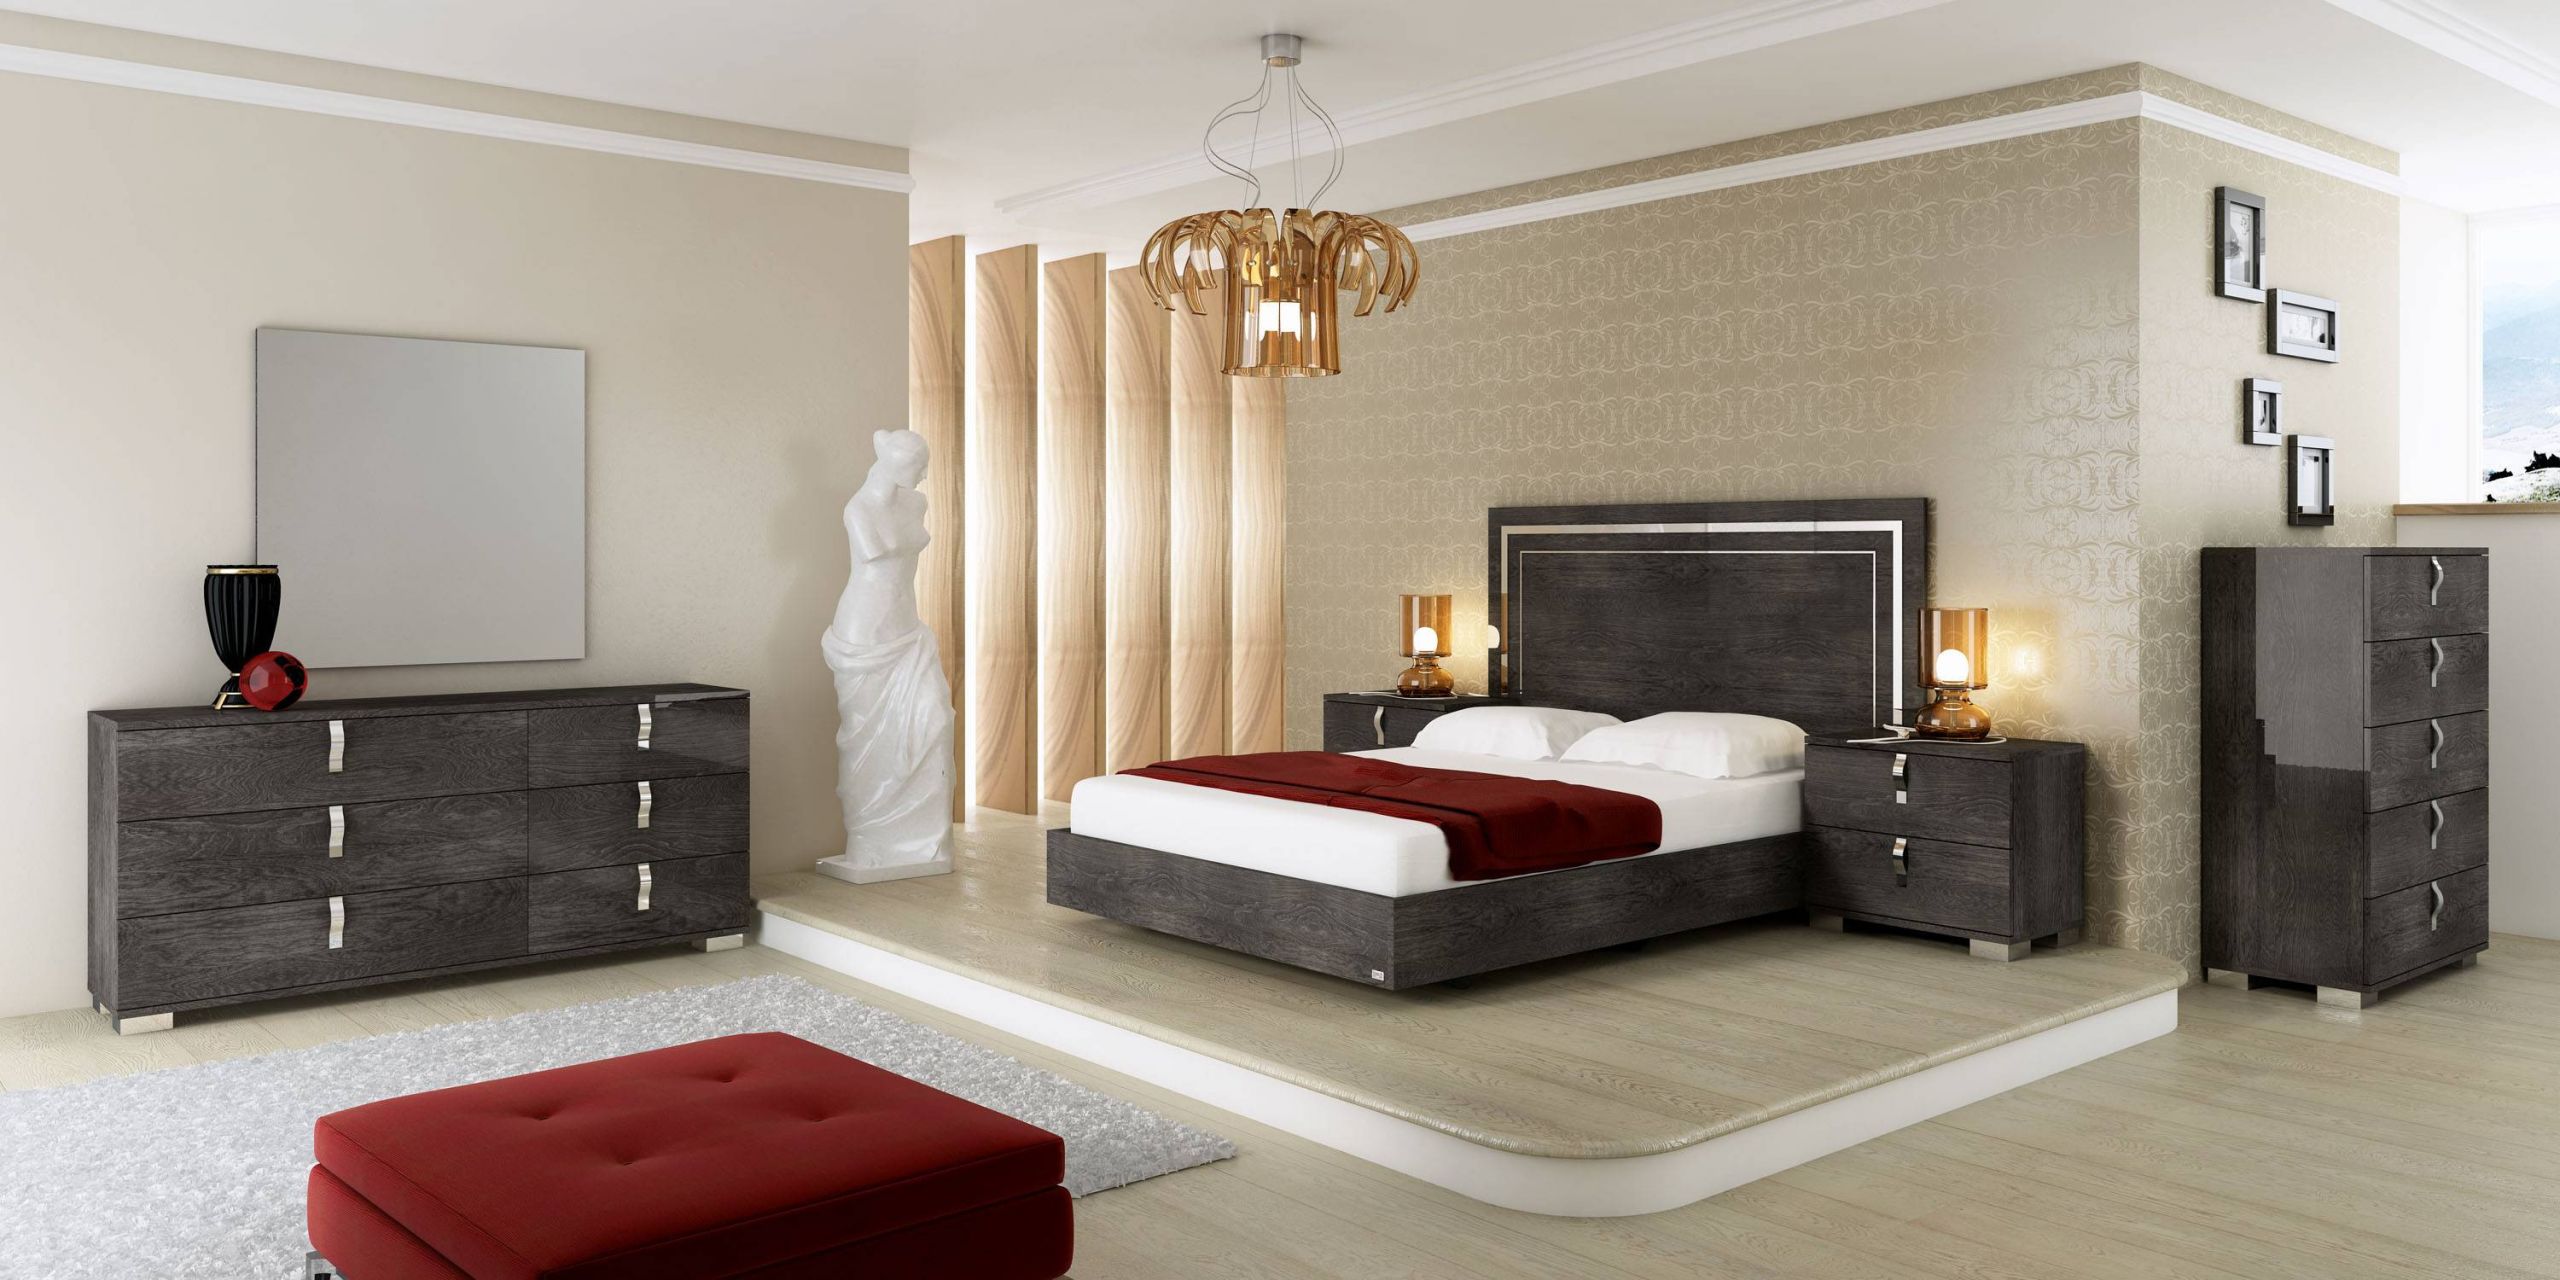 Luxurious Master Bedroom Furniture
 Made in Italy Wood Luxury Elite Bedroom Furniture with